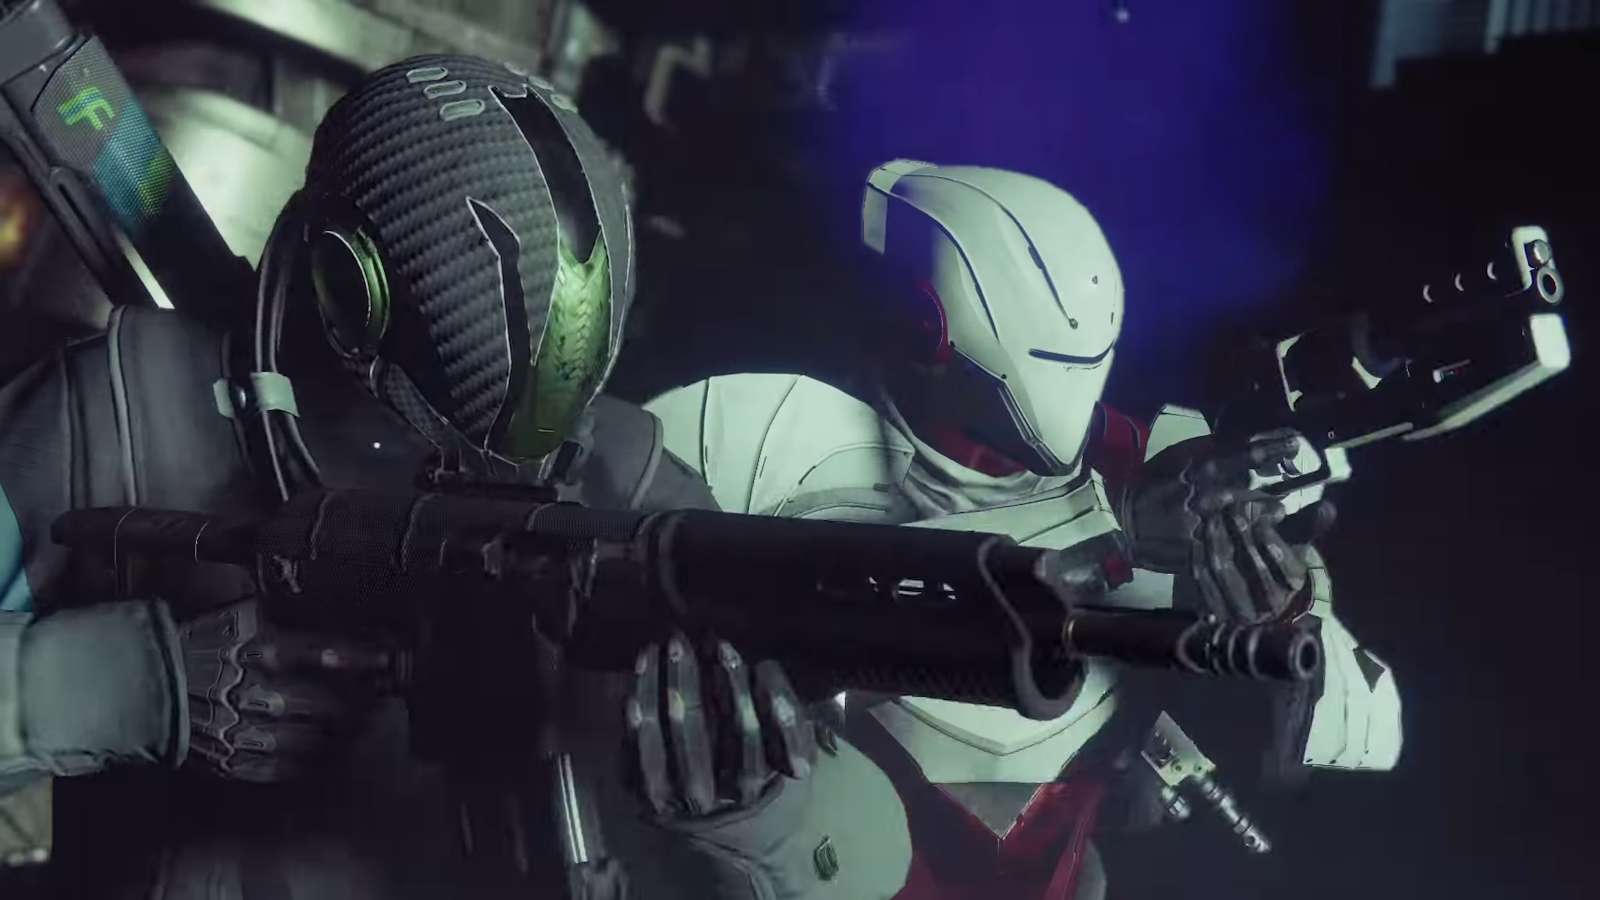 Destiny 2 guardians with Hand Cannon and Auto Rifle going to fight cabal in Destiny 2 reveal trailer.